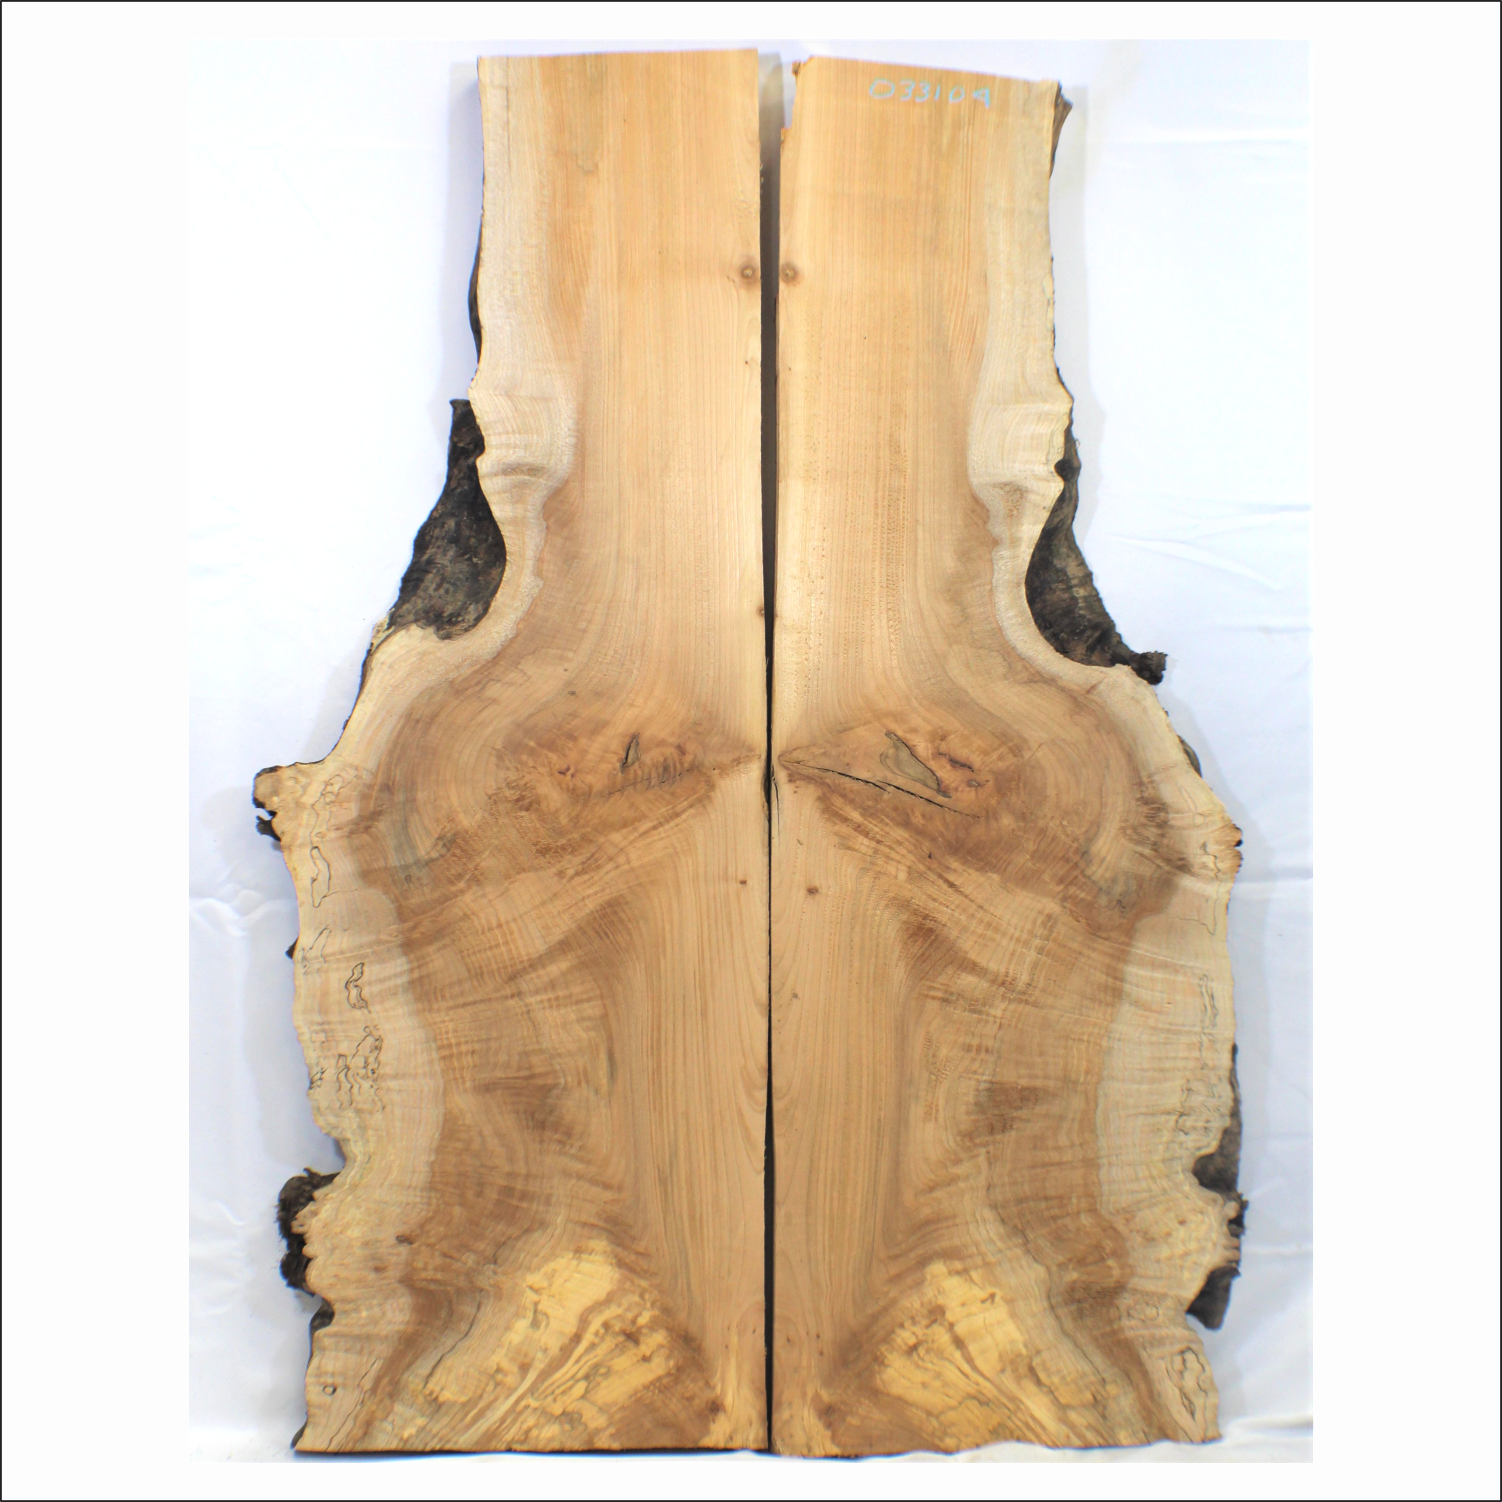 2-piece flame table set with light to medium curl throughout, burls, and live edge.  Dimensions: Thickness each piece: 1.25